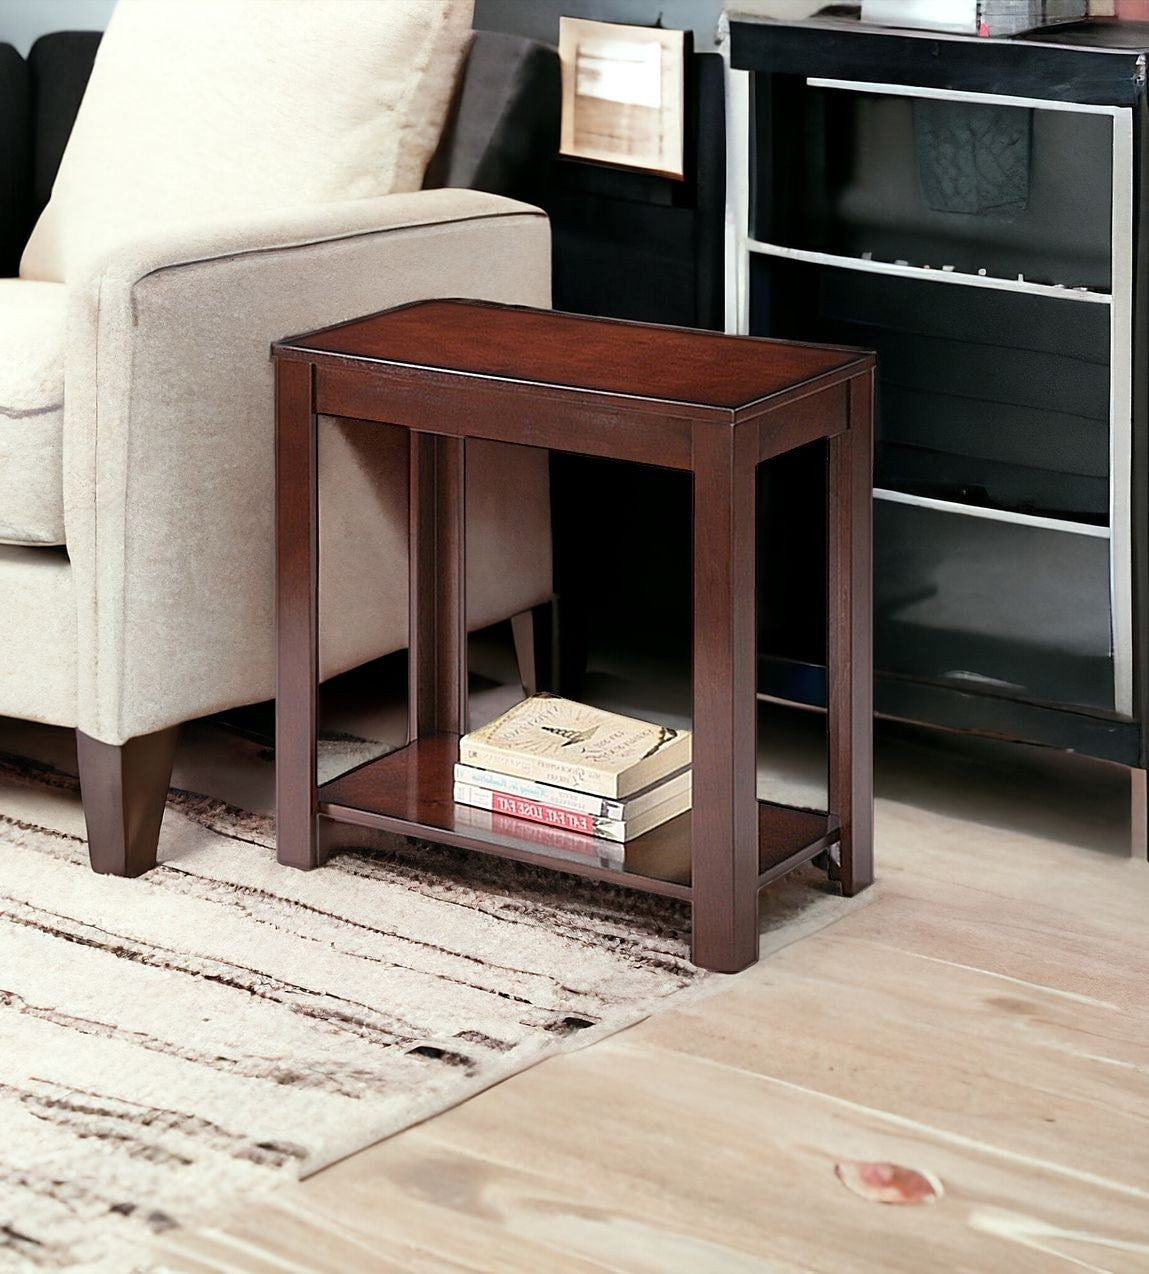 24" Brown End Table With Shelf